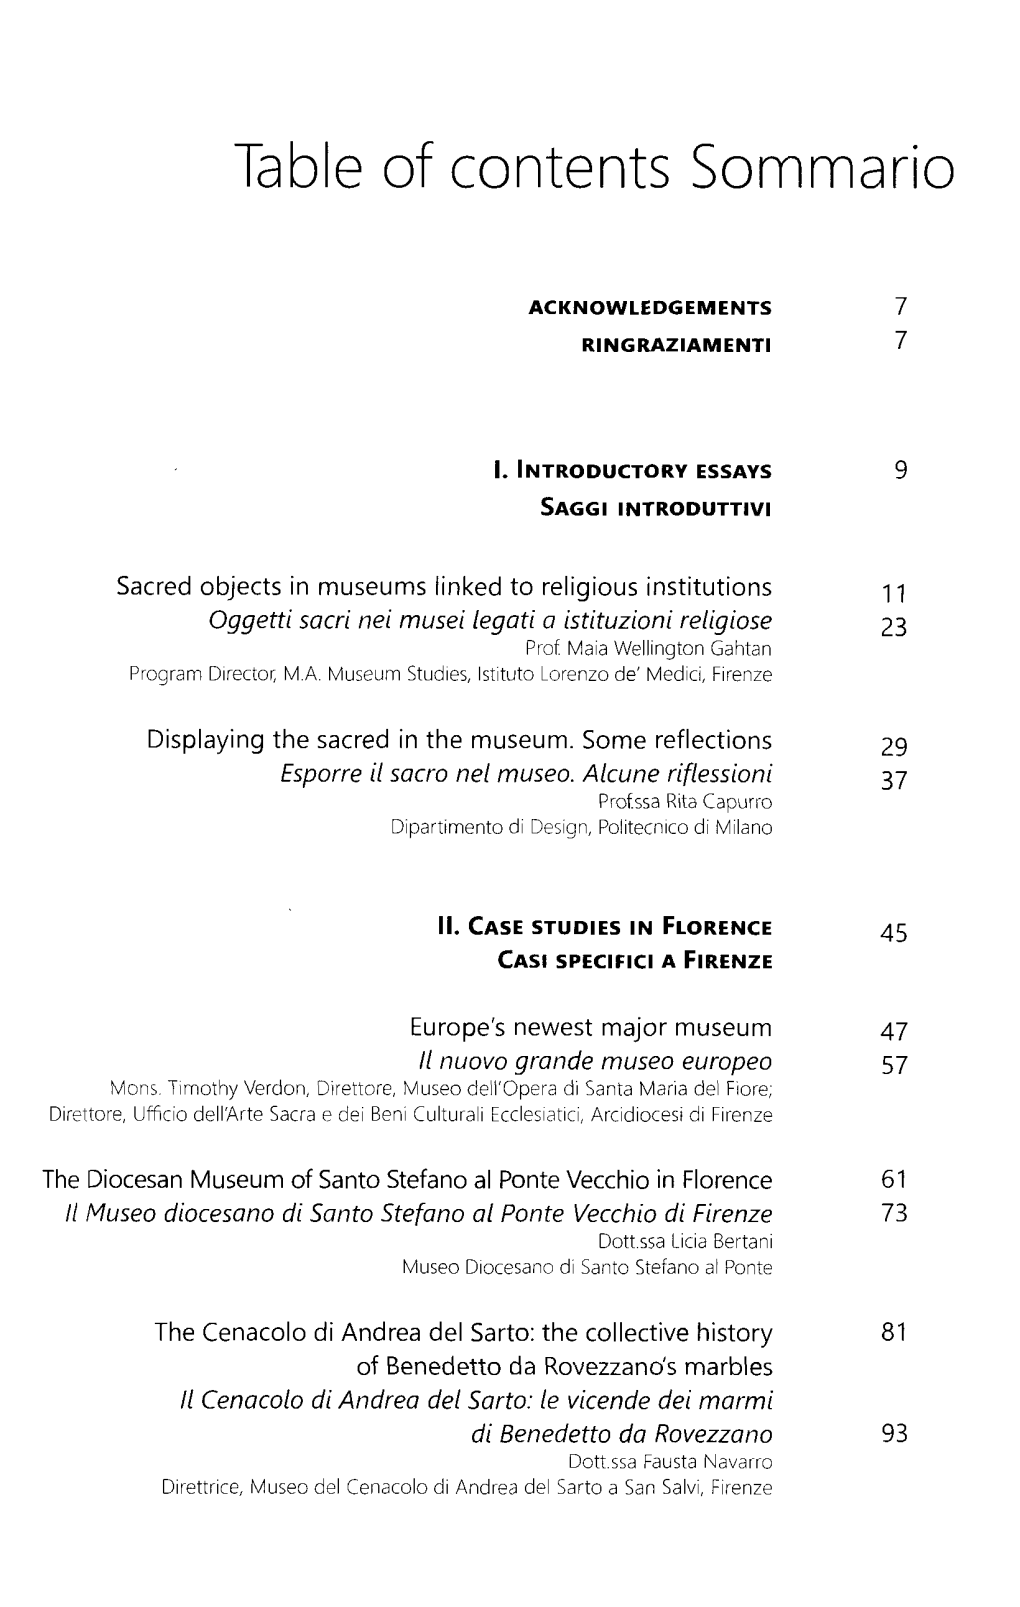 Table of Contents Sommario